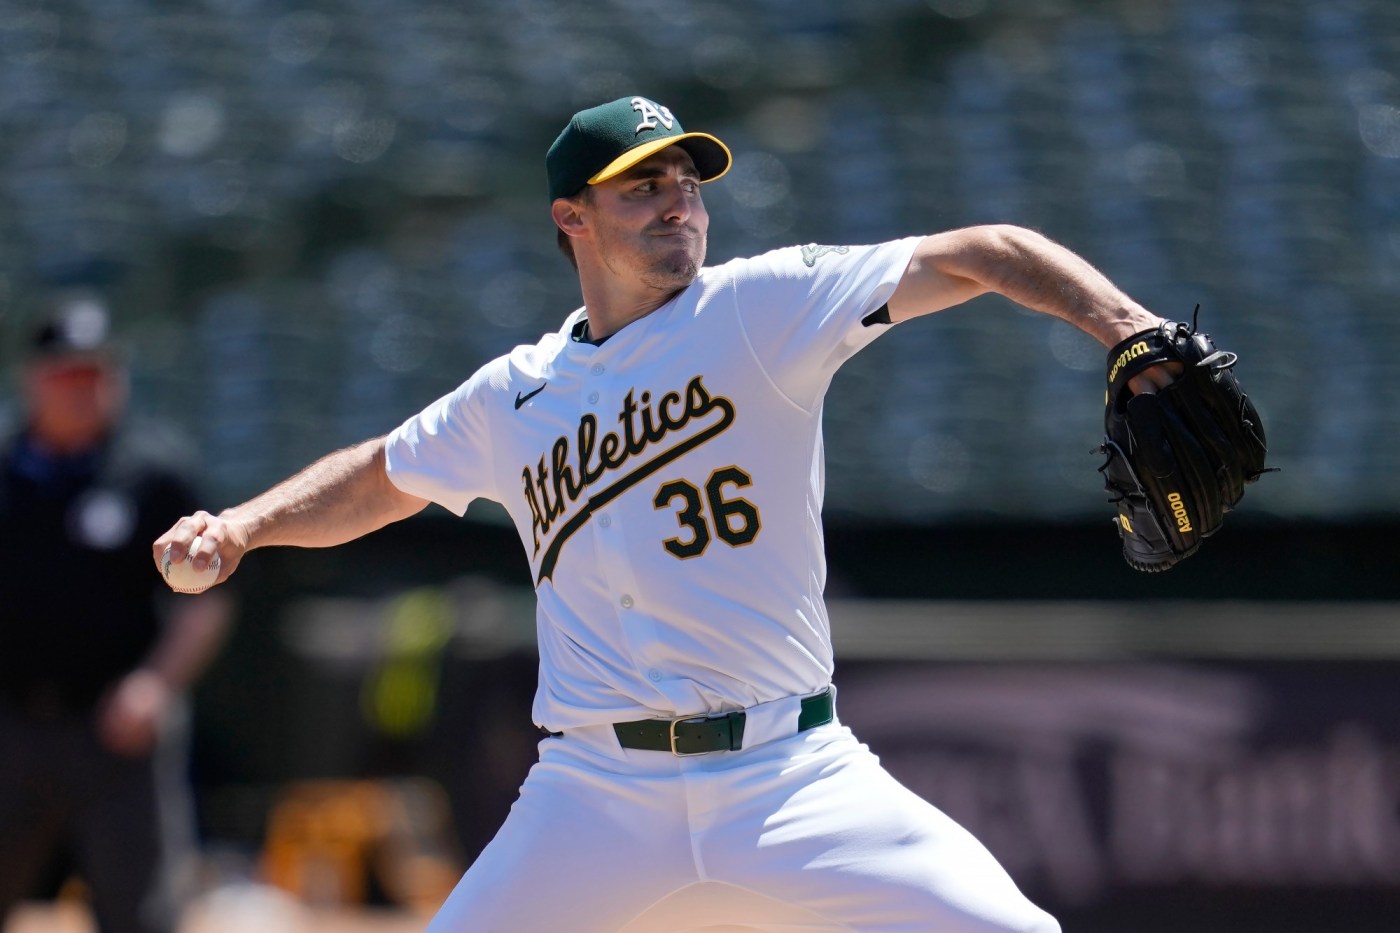 athletics’-ross-stripling-joins-the-party-in-sweep-of-pirates